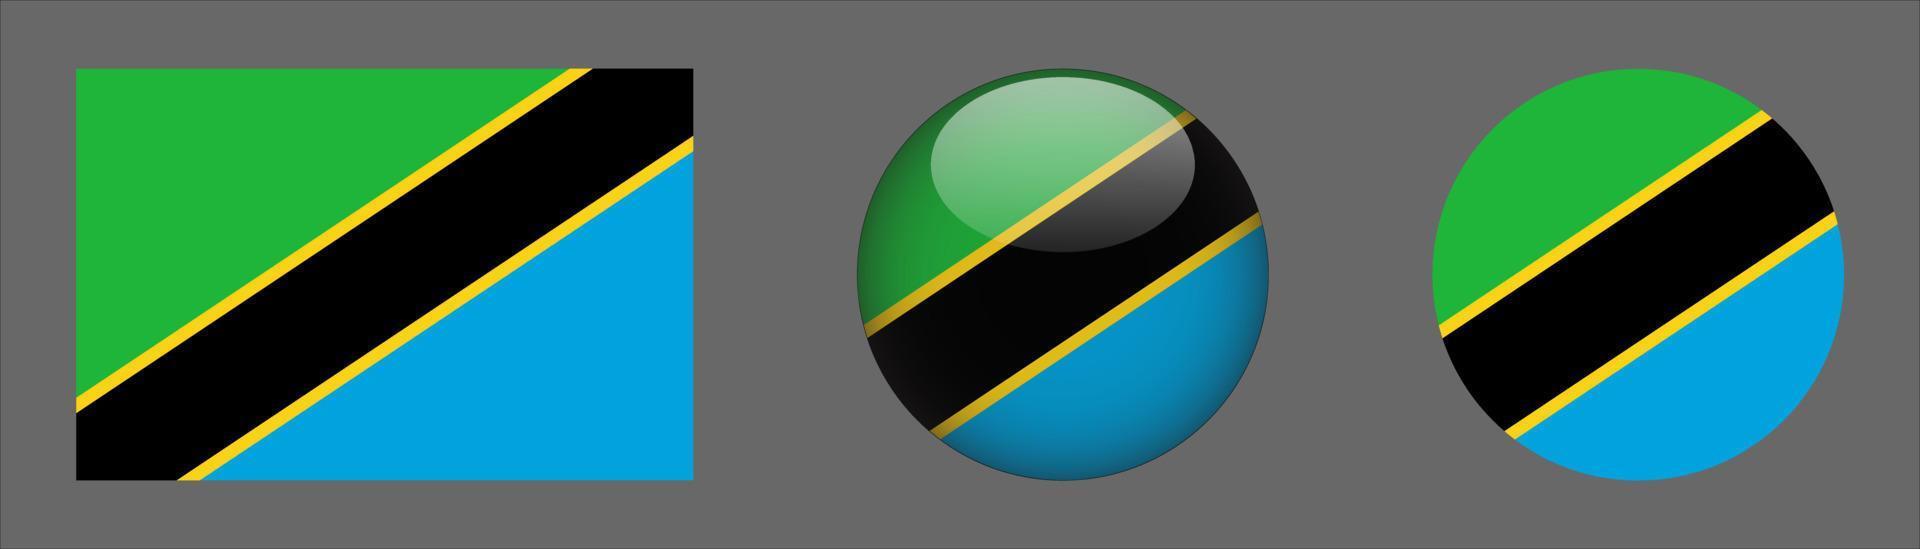 Tanzania Flag Set Collection, Original Size Ratio, 3D Rounded and Flat Rounded. vector